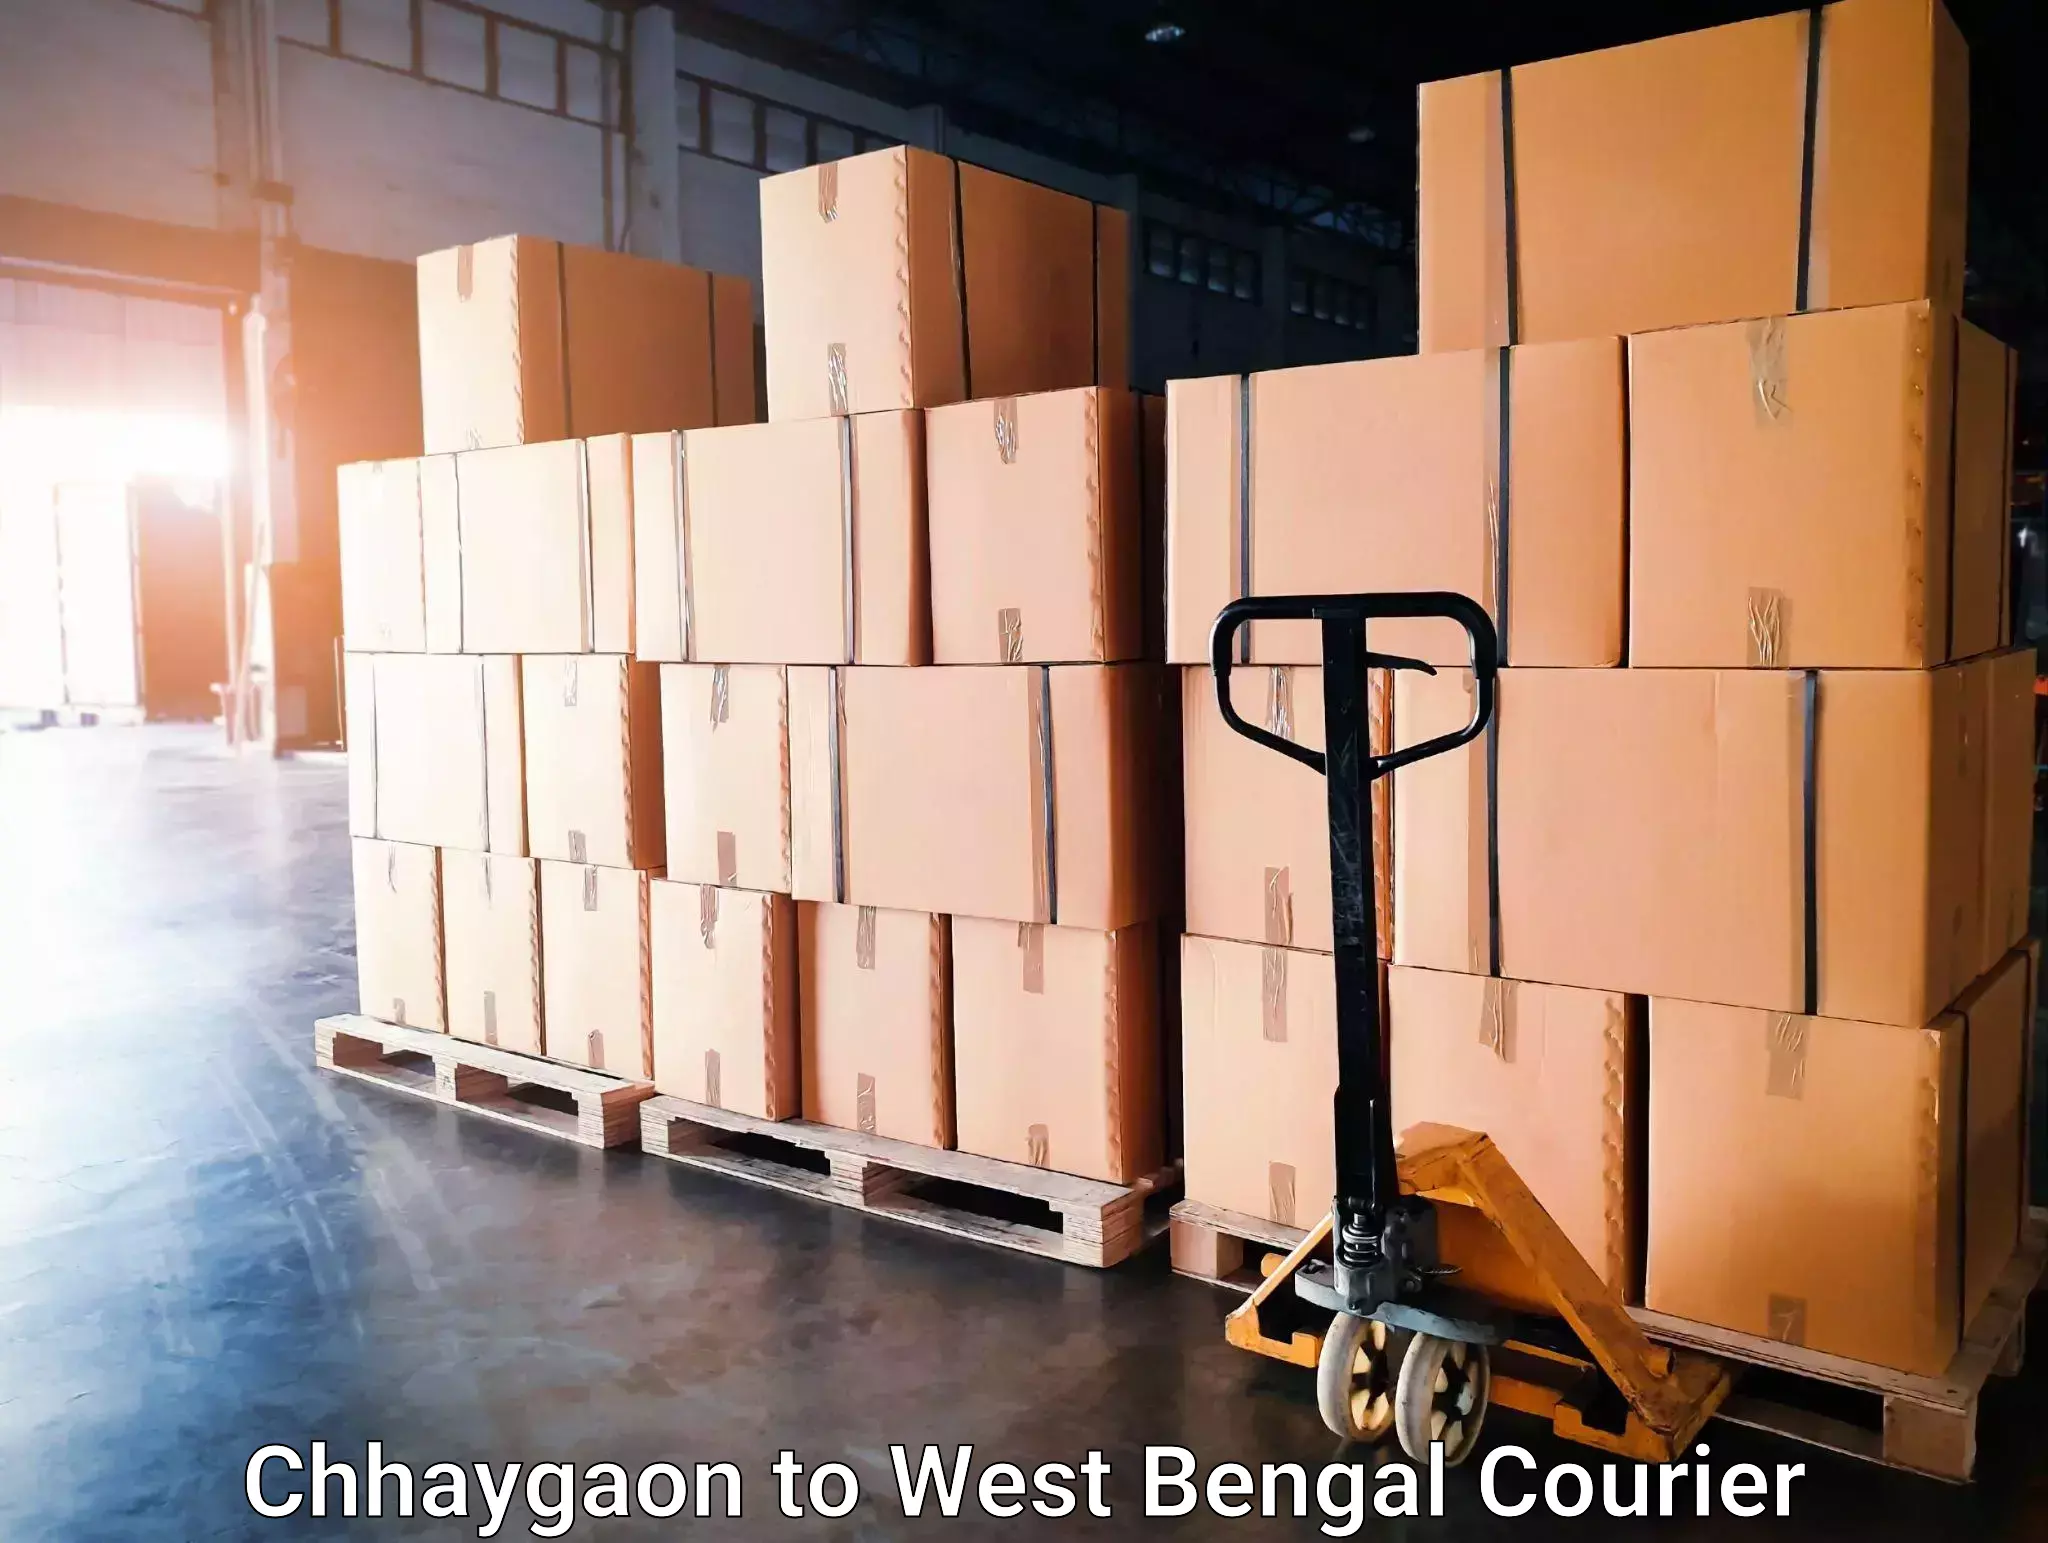 Courier service comparison Chhaygaon to West Bengal